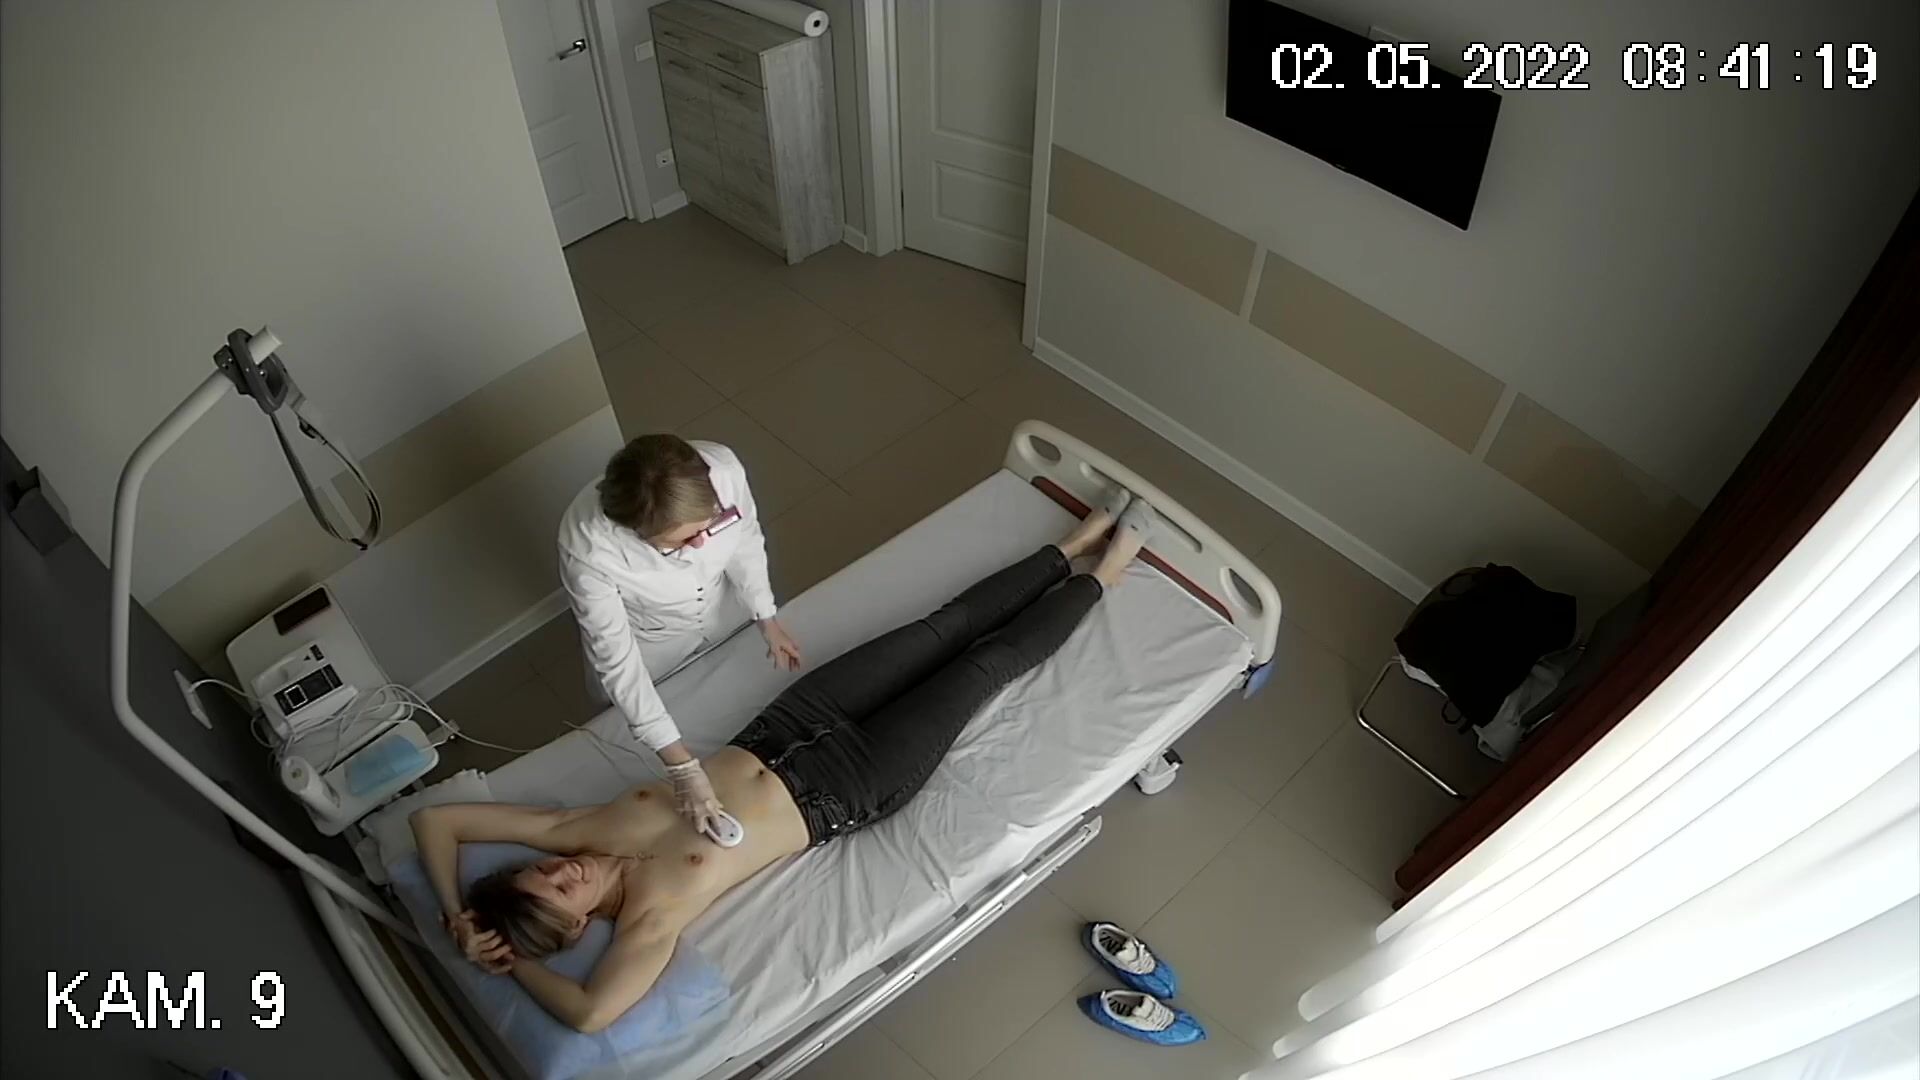 Spy Cam Medical Therapy 4